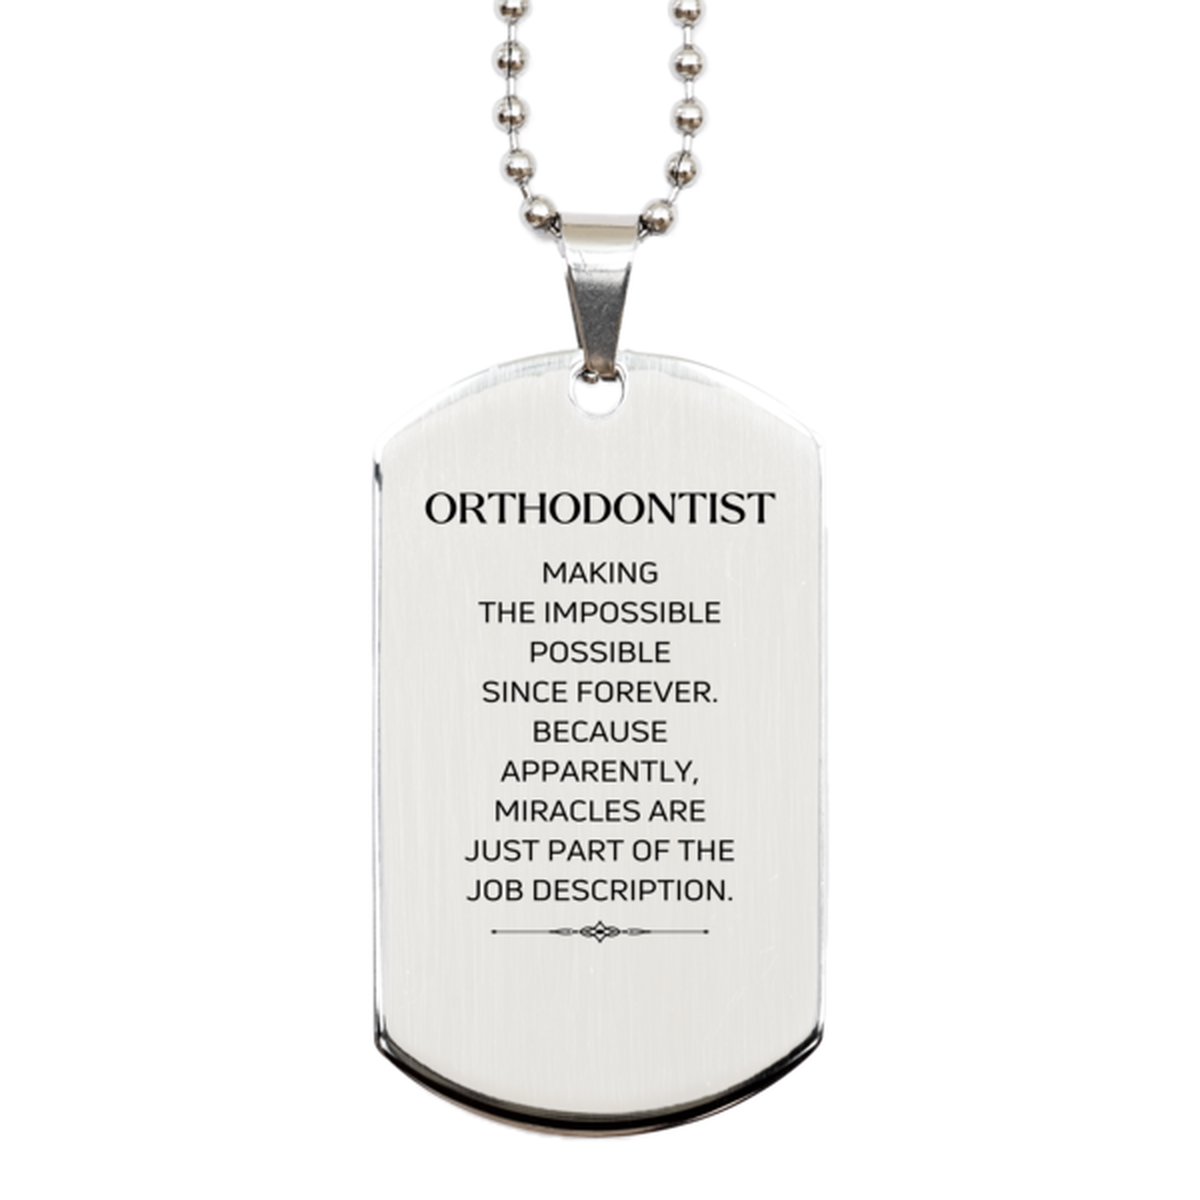 Funny Orthodontist Gifts, Miracles are just part of the job description, Inspirational Birthday Silver Dog Tag For Orthodontist, Men, Women, Coworkers, Friends, Boss